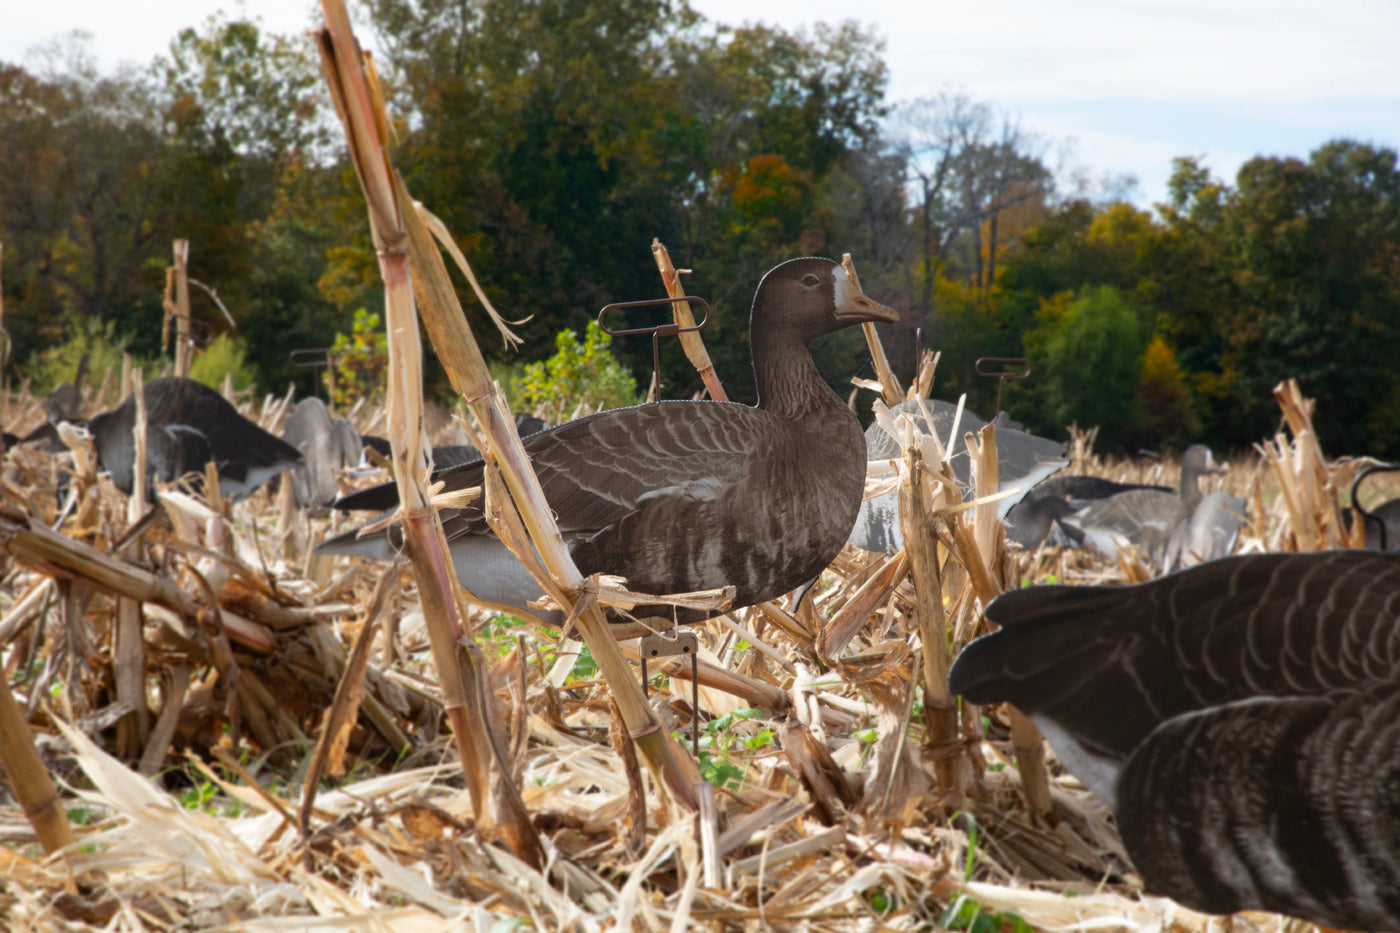 Higdon FLATS Specklebelly Goose Motion Silhouette Decoys 12 Pack – Fort  Thompson